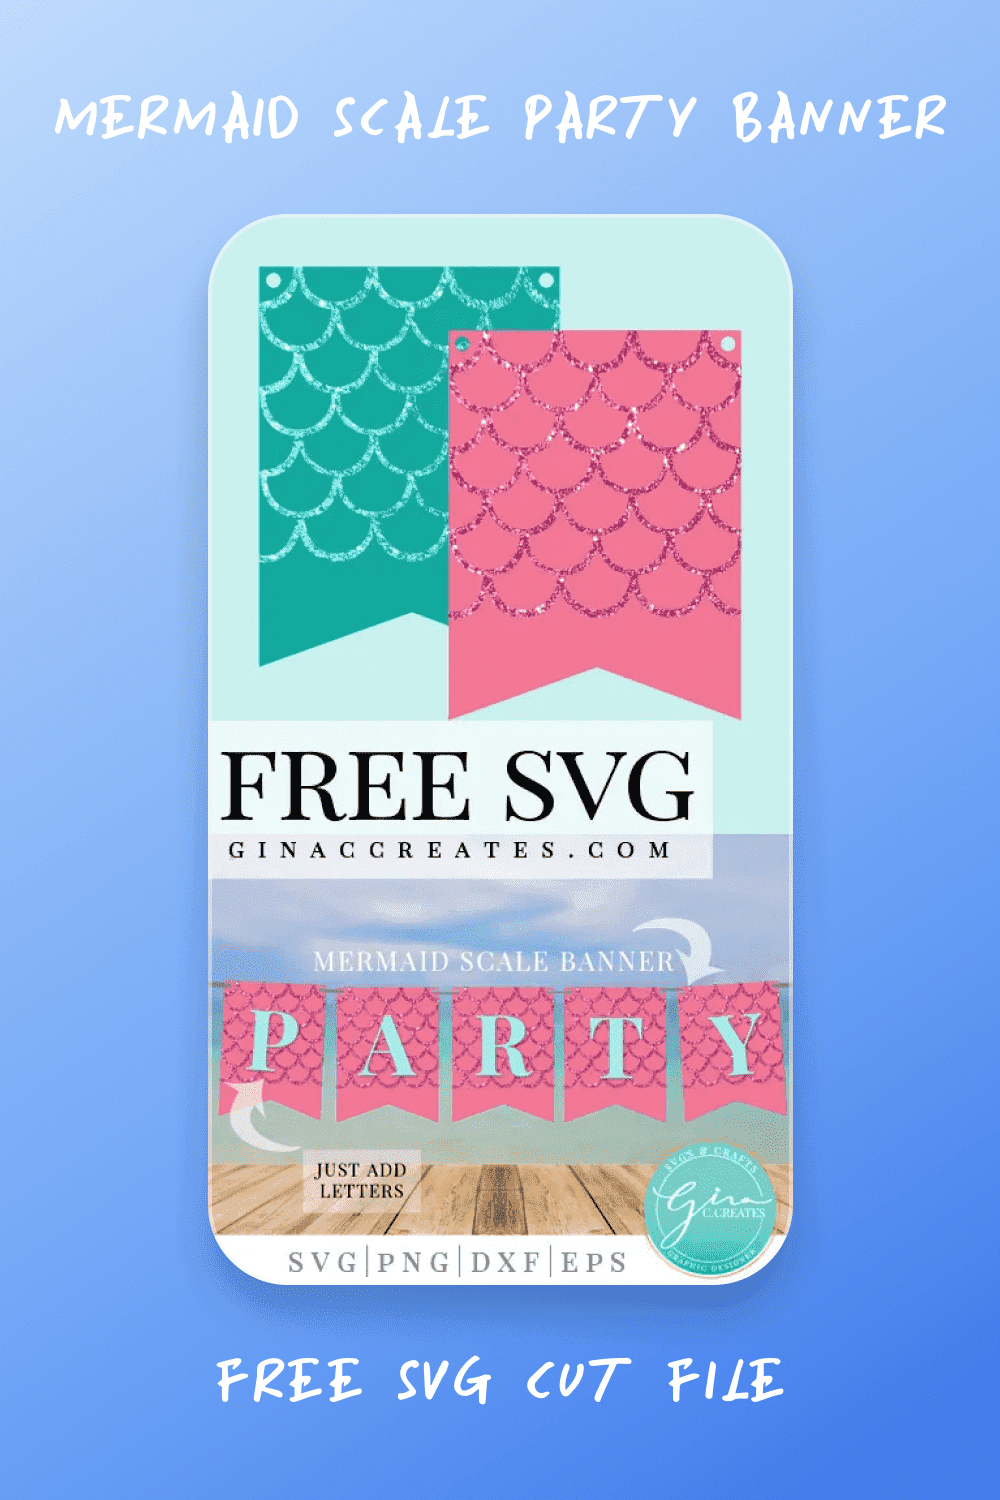 MERMAID SCALE PARTY BANNER | FREE SVG CUT FILE.